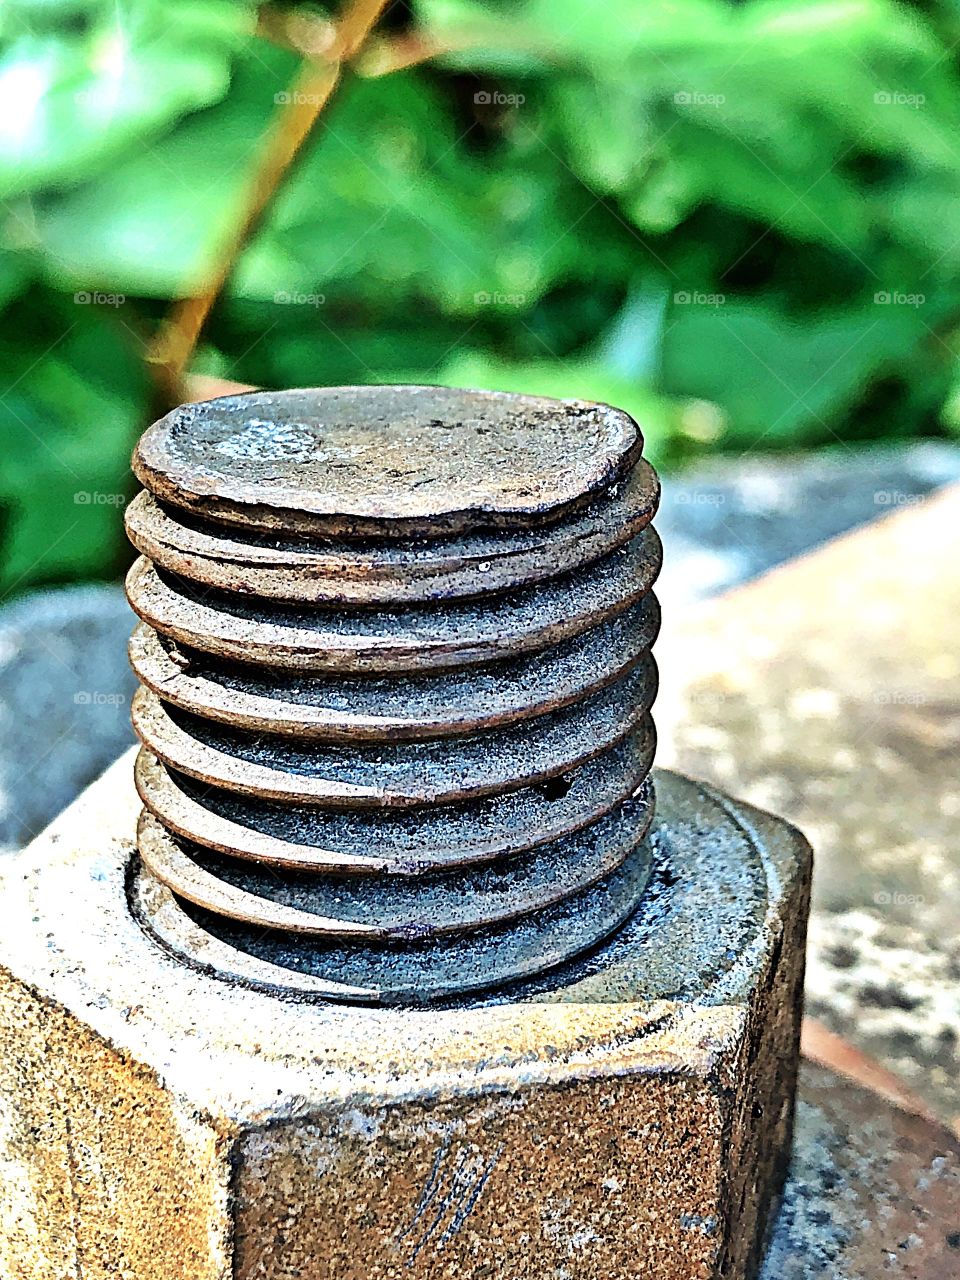 Rusted bolt/screw and nut on a steel structure attached to a concrete block. Rusty texture